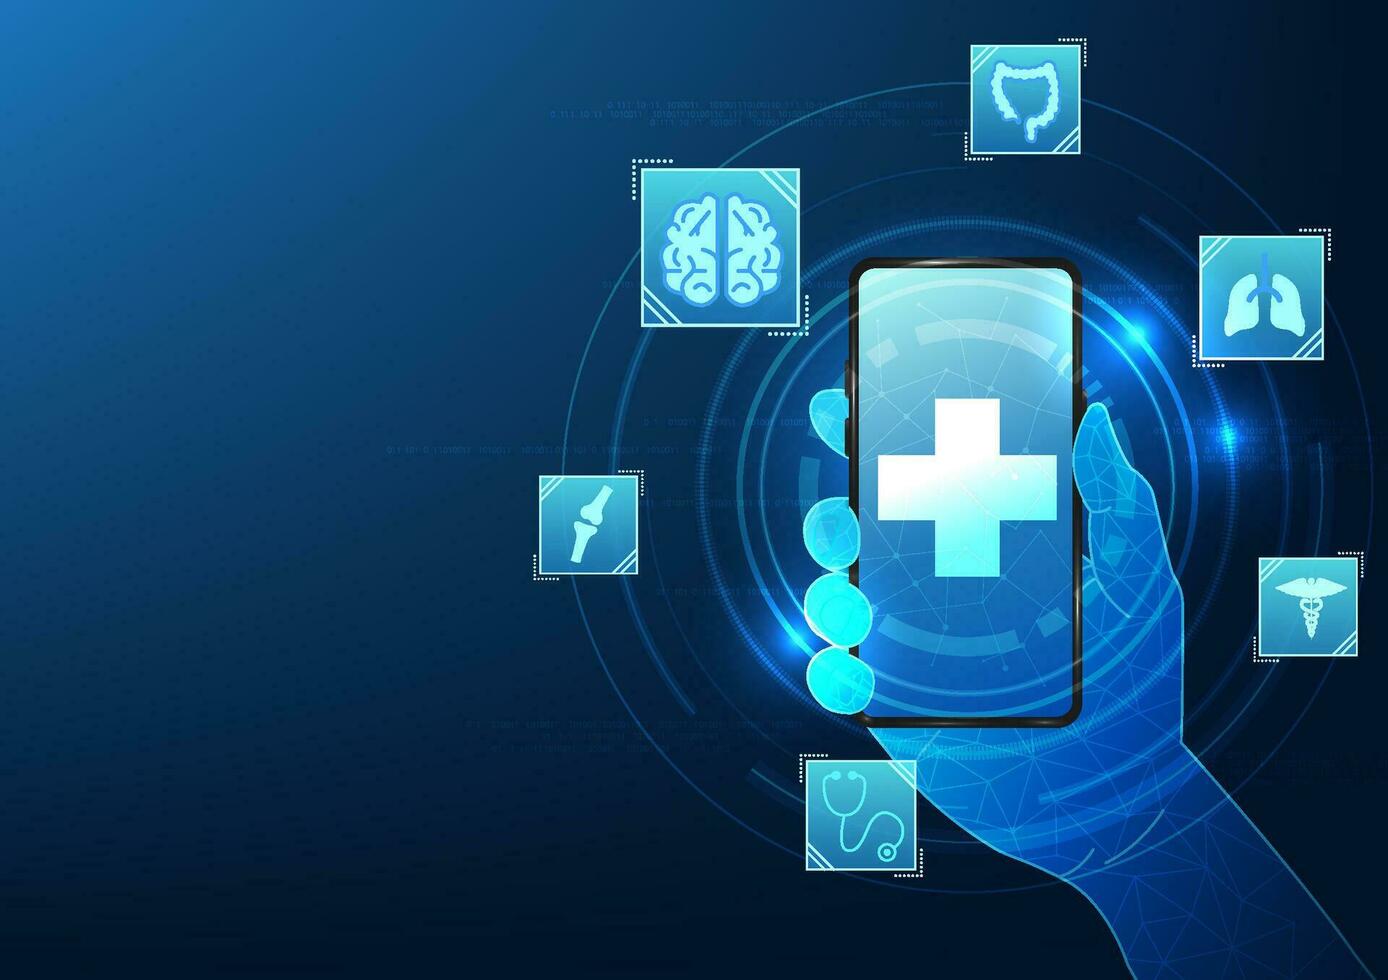 Telemedicine medical technology background through smartphone showing medical icons Shows basic treatment of illnesses with a doctor, talking, and videoconferencing. to inquire about symptoms vector